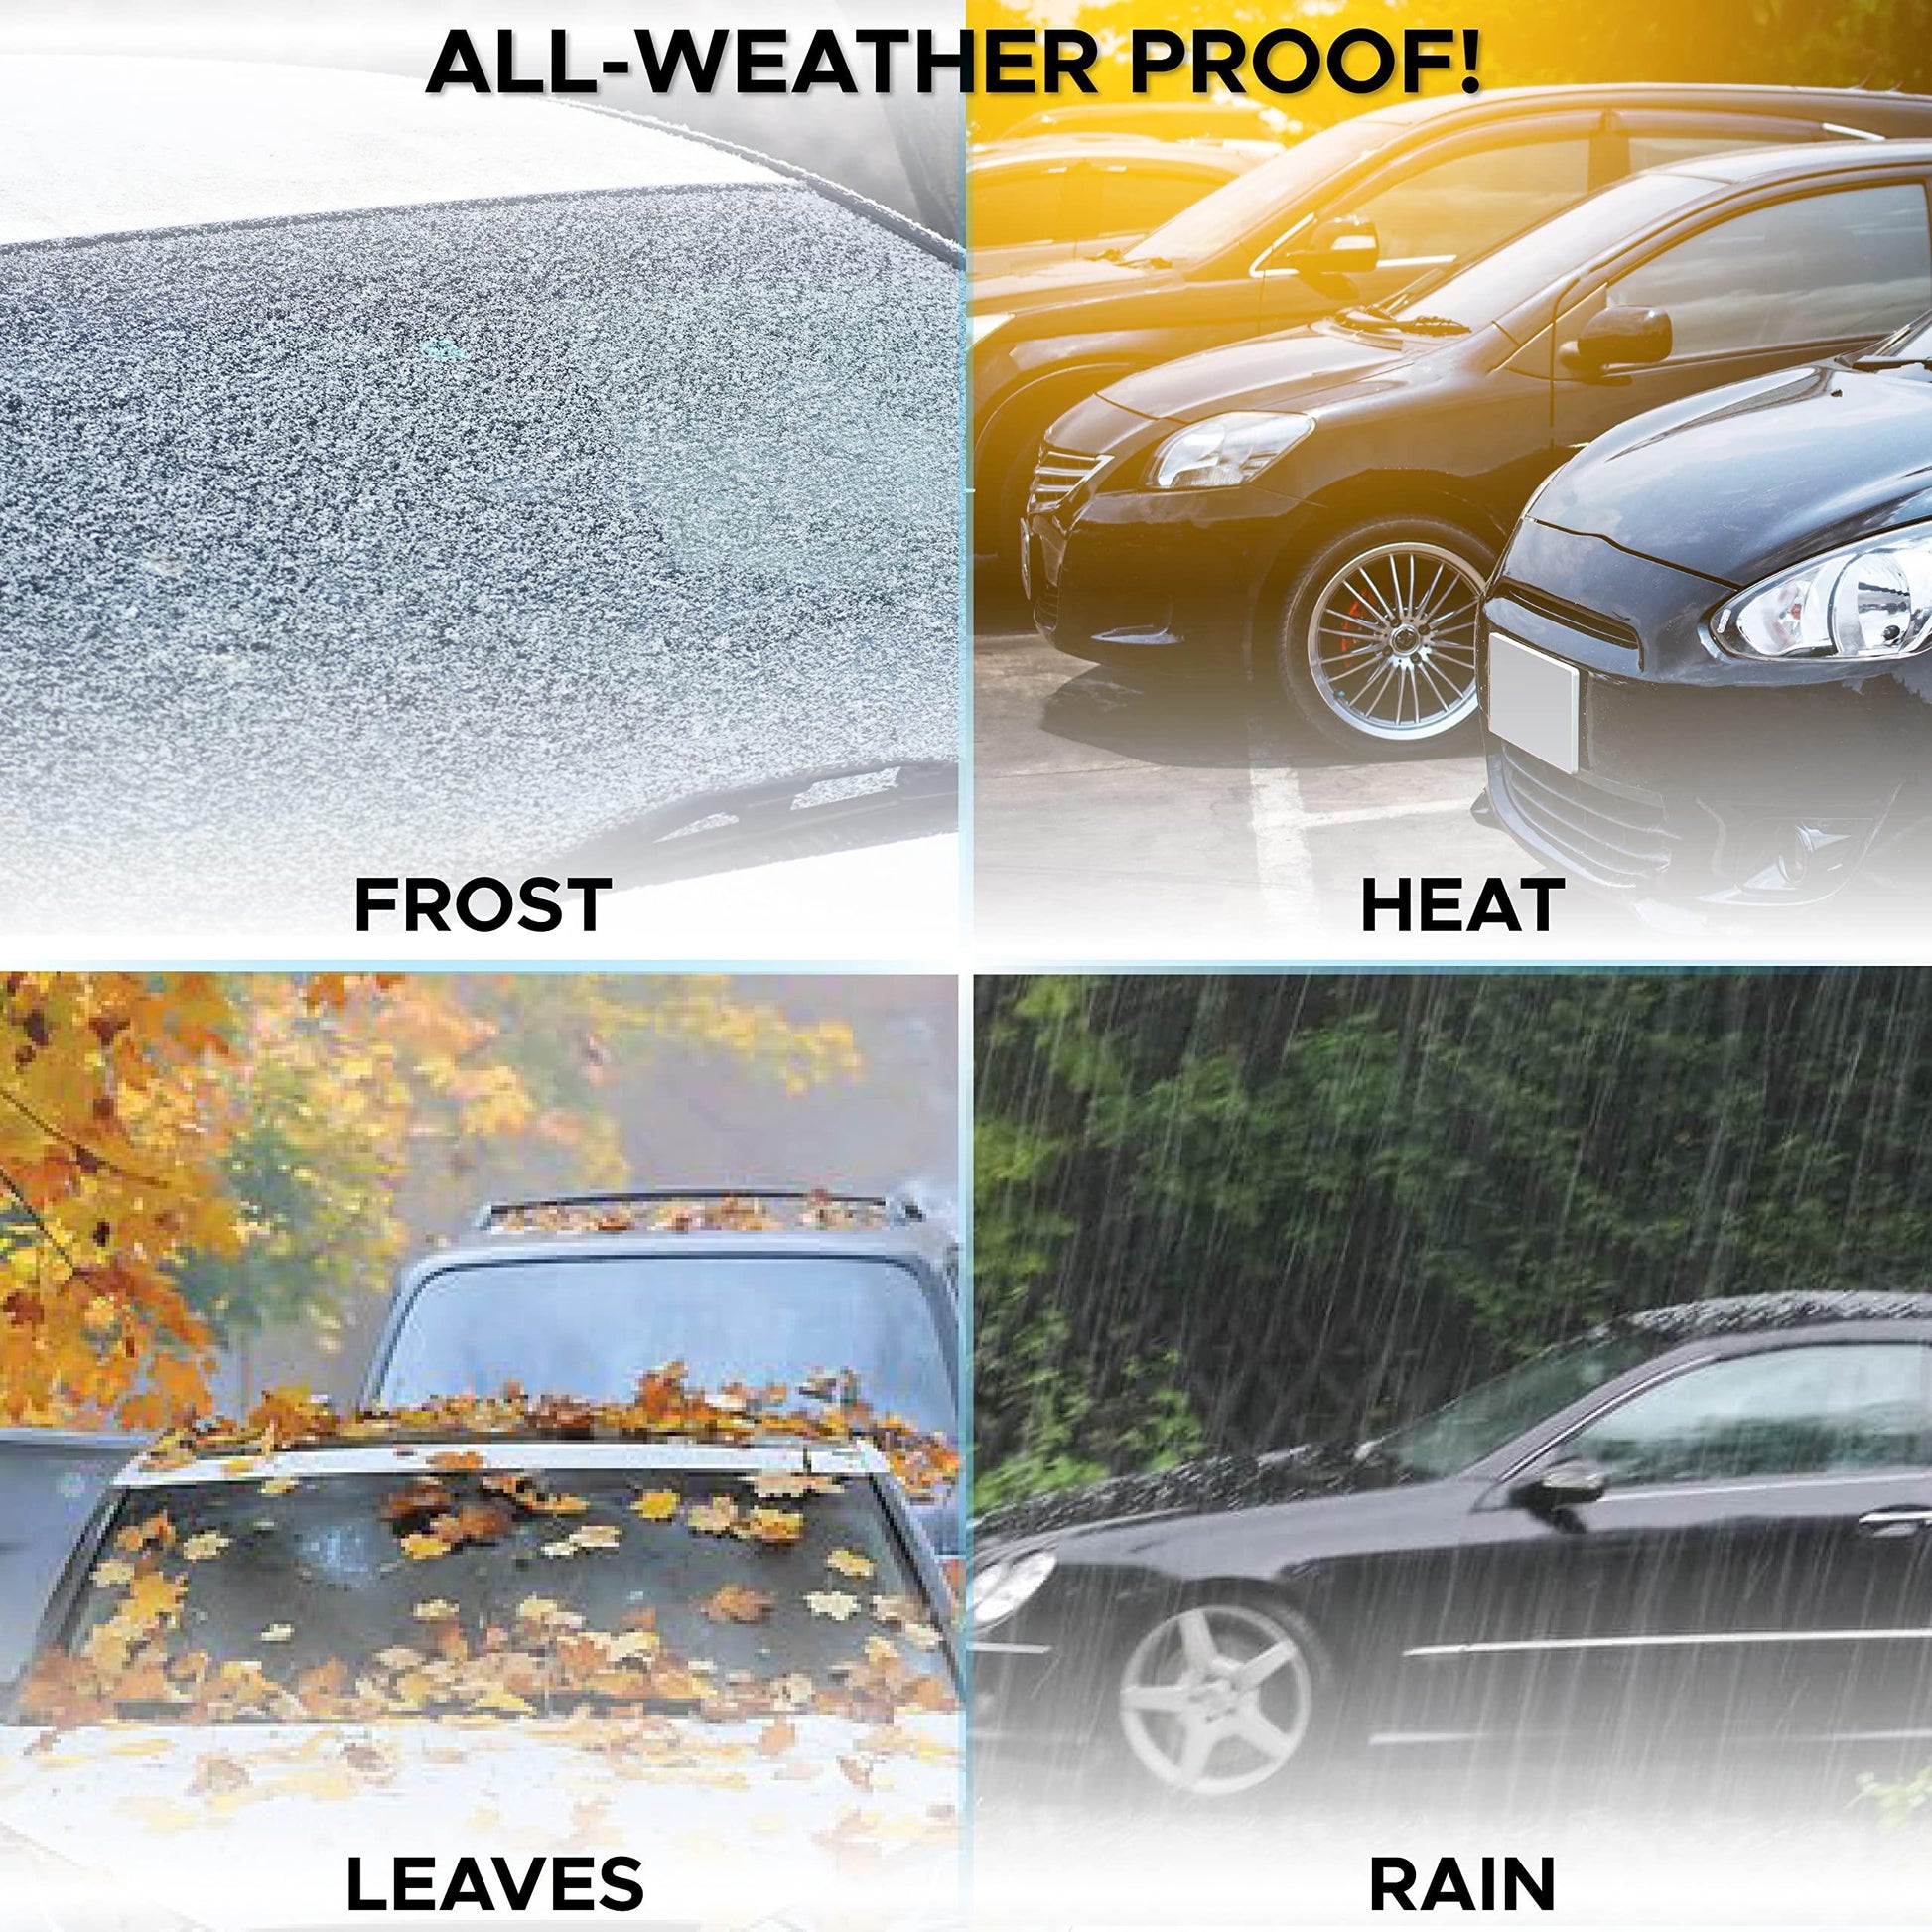  EcoNour Side Mirror Covers and Windshield Wiper Covers for  Winter, Fits for Most Cars, SUV's, Vans, and Trucks